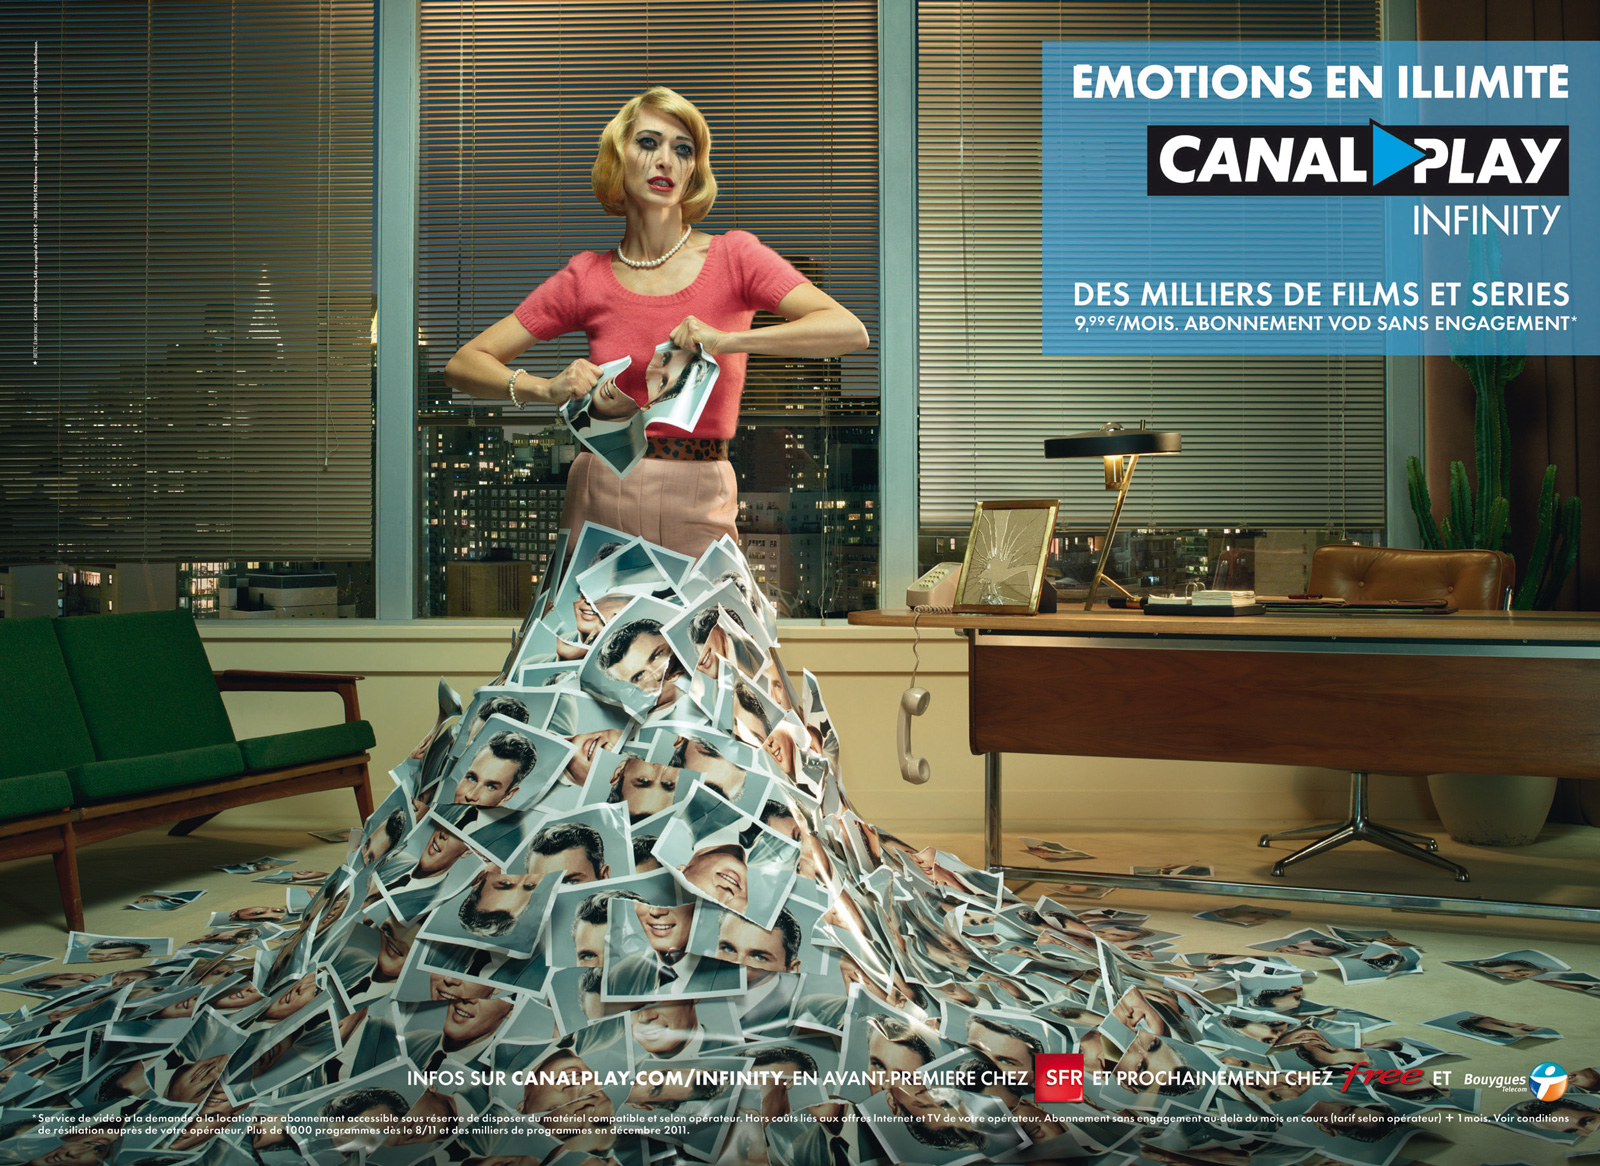 http://lareclame.fr/wp-content/uploads/2011/11/Canalplay_Emotion_320x240.jpg